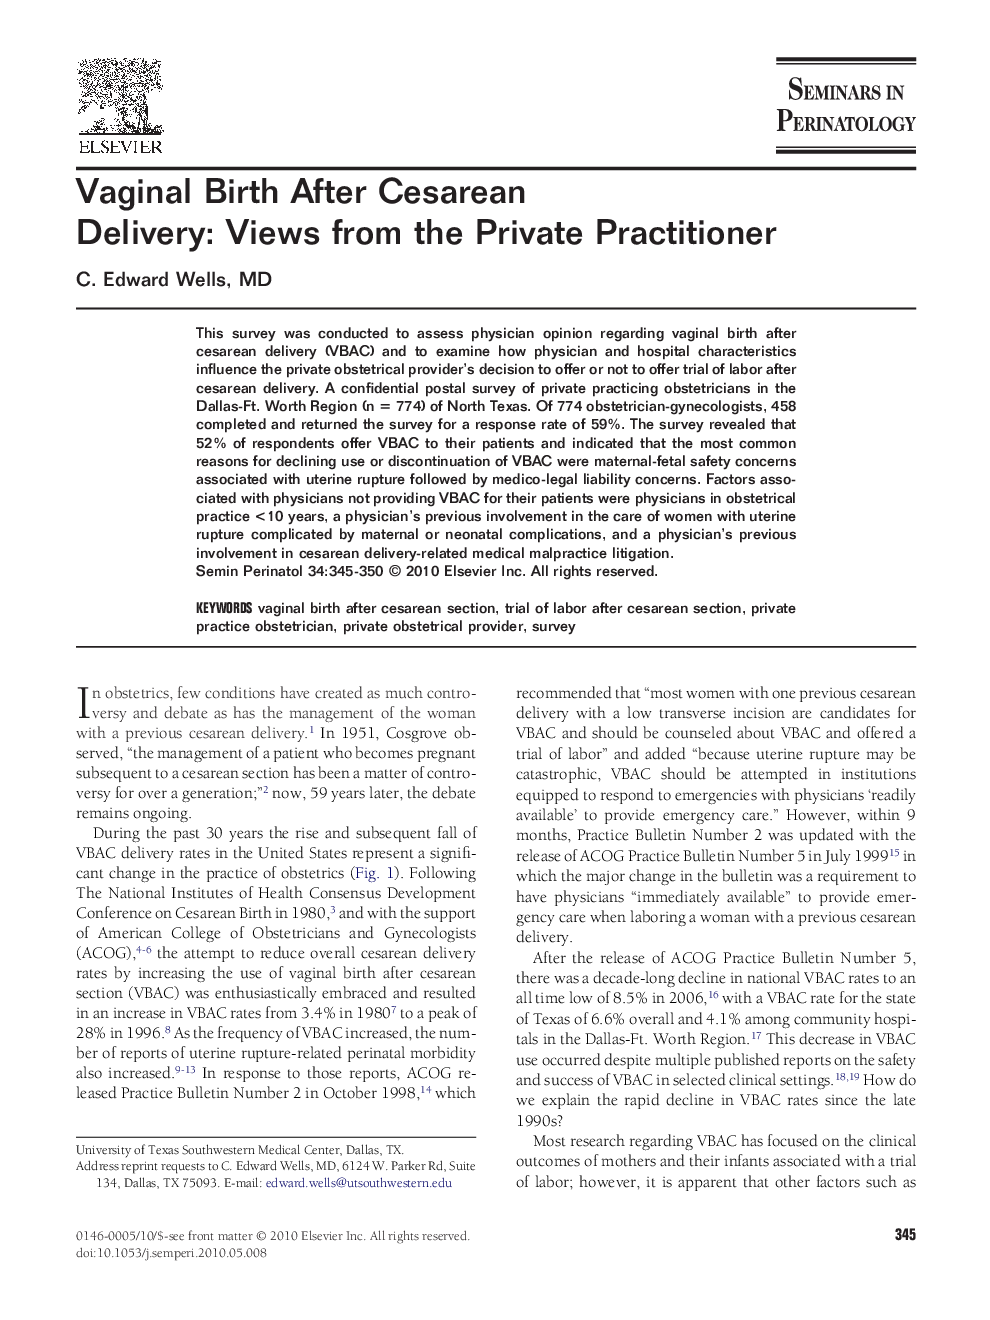 Vaginal Birth After Cesarean Delivery: Views from the Private Practitioner